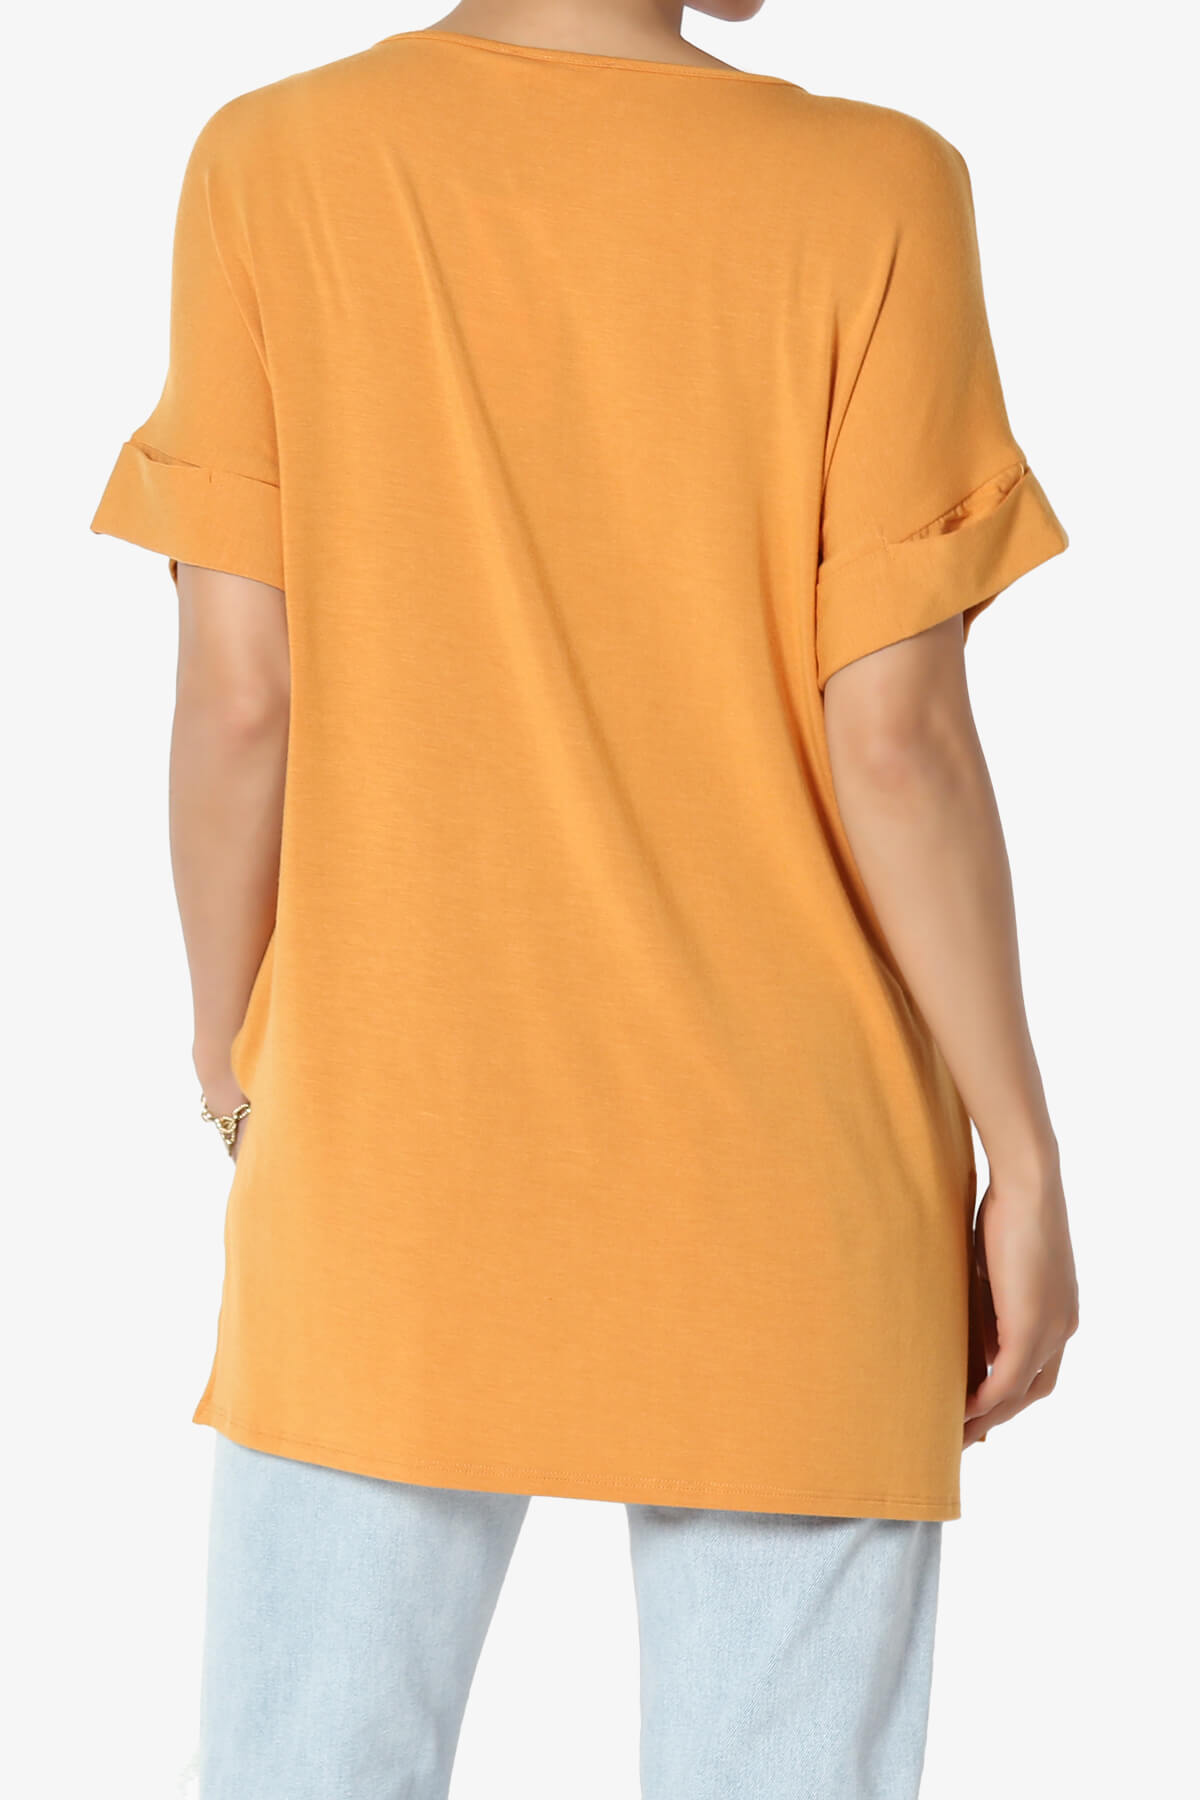 Load image into Gallery viewer, Poloma Modal Jersey Boat Neck Top GOLDEN MUSTARD_2
